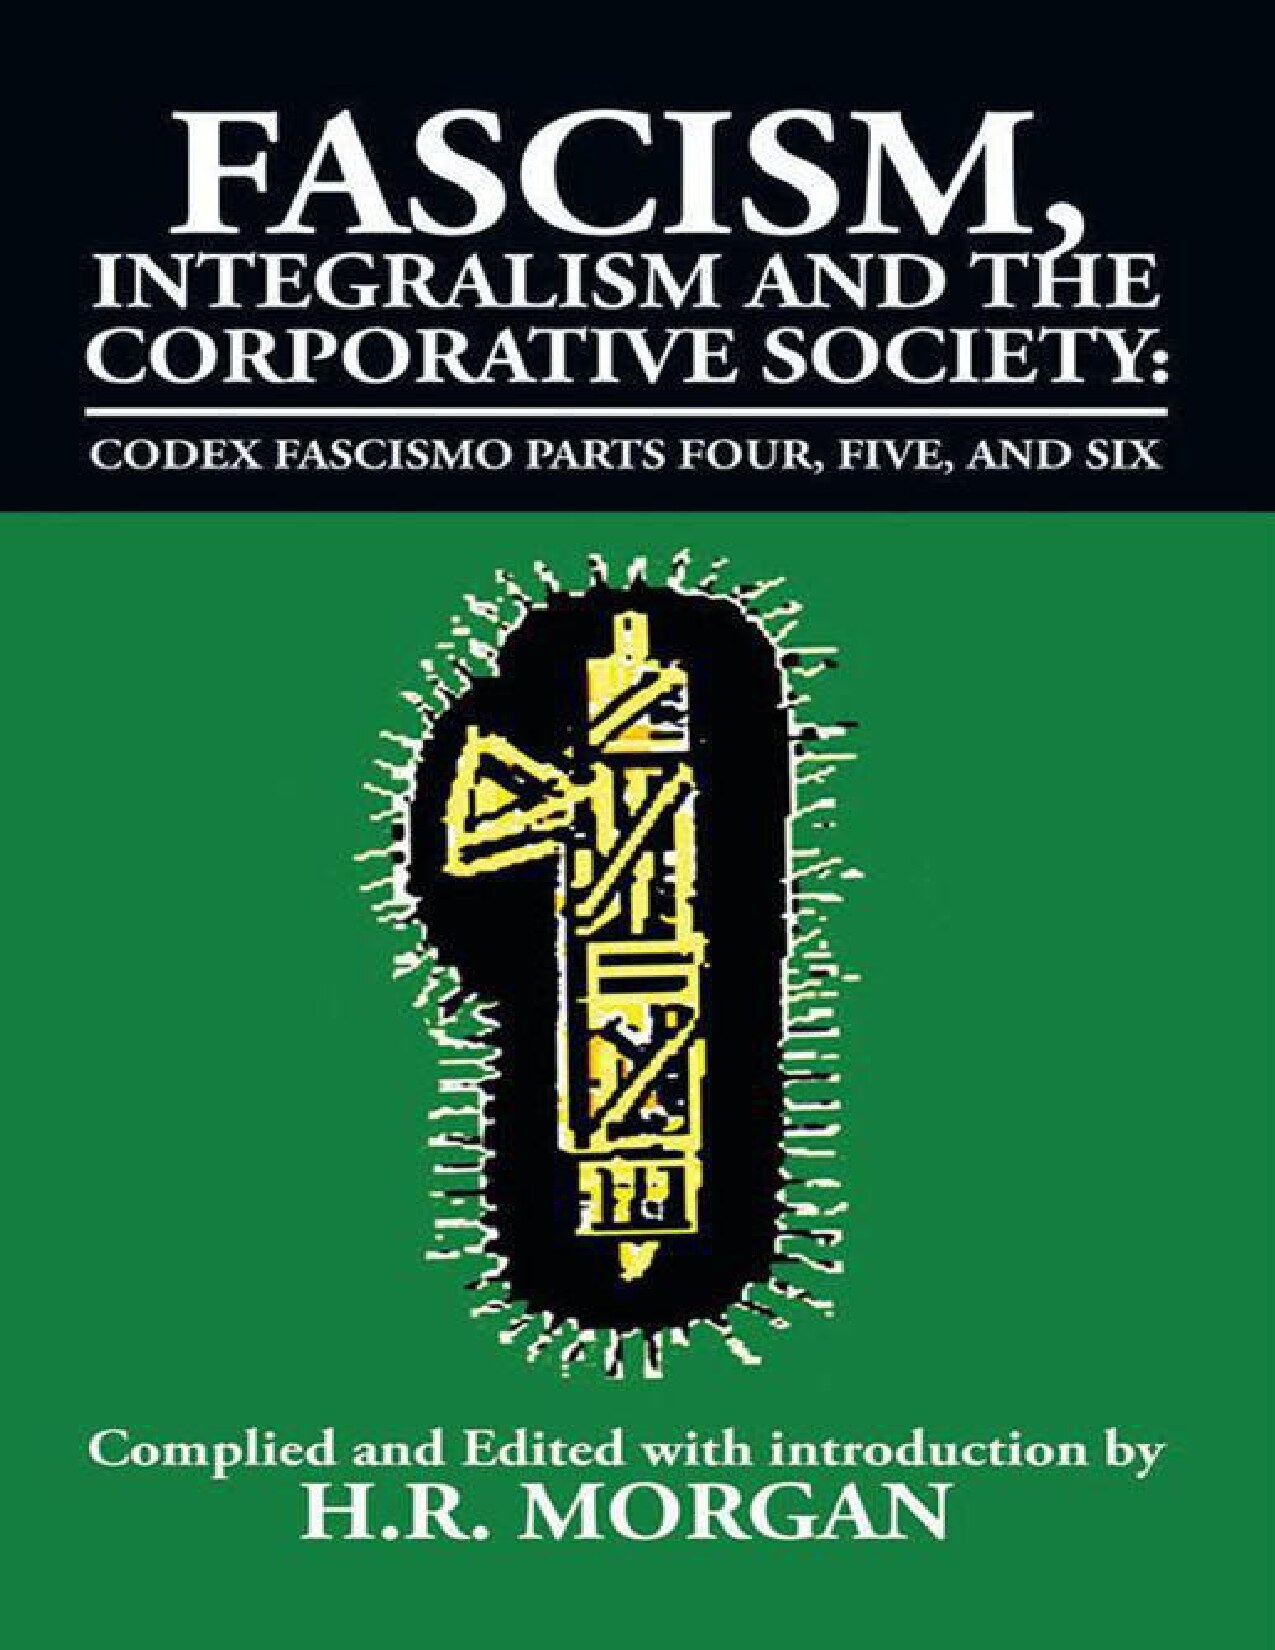 Fascism, Integralism and the Corporative Society – Codex Fascismo Parts Four, Five and Six: Codex Fascismo Parts Four, Five and Six